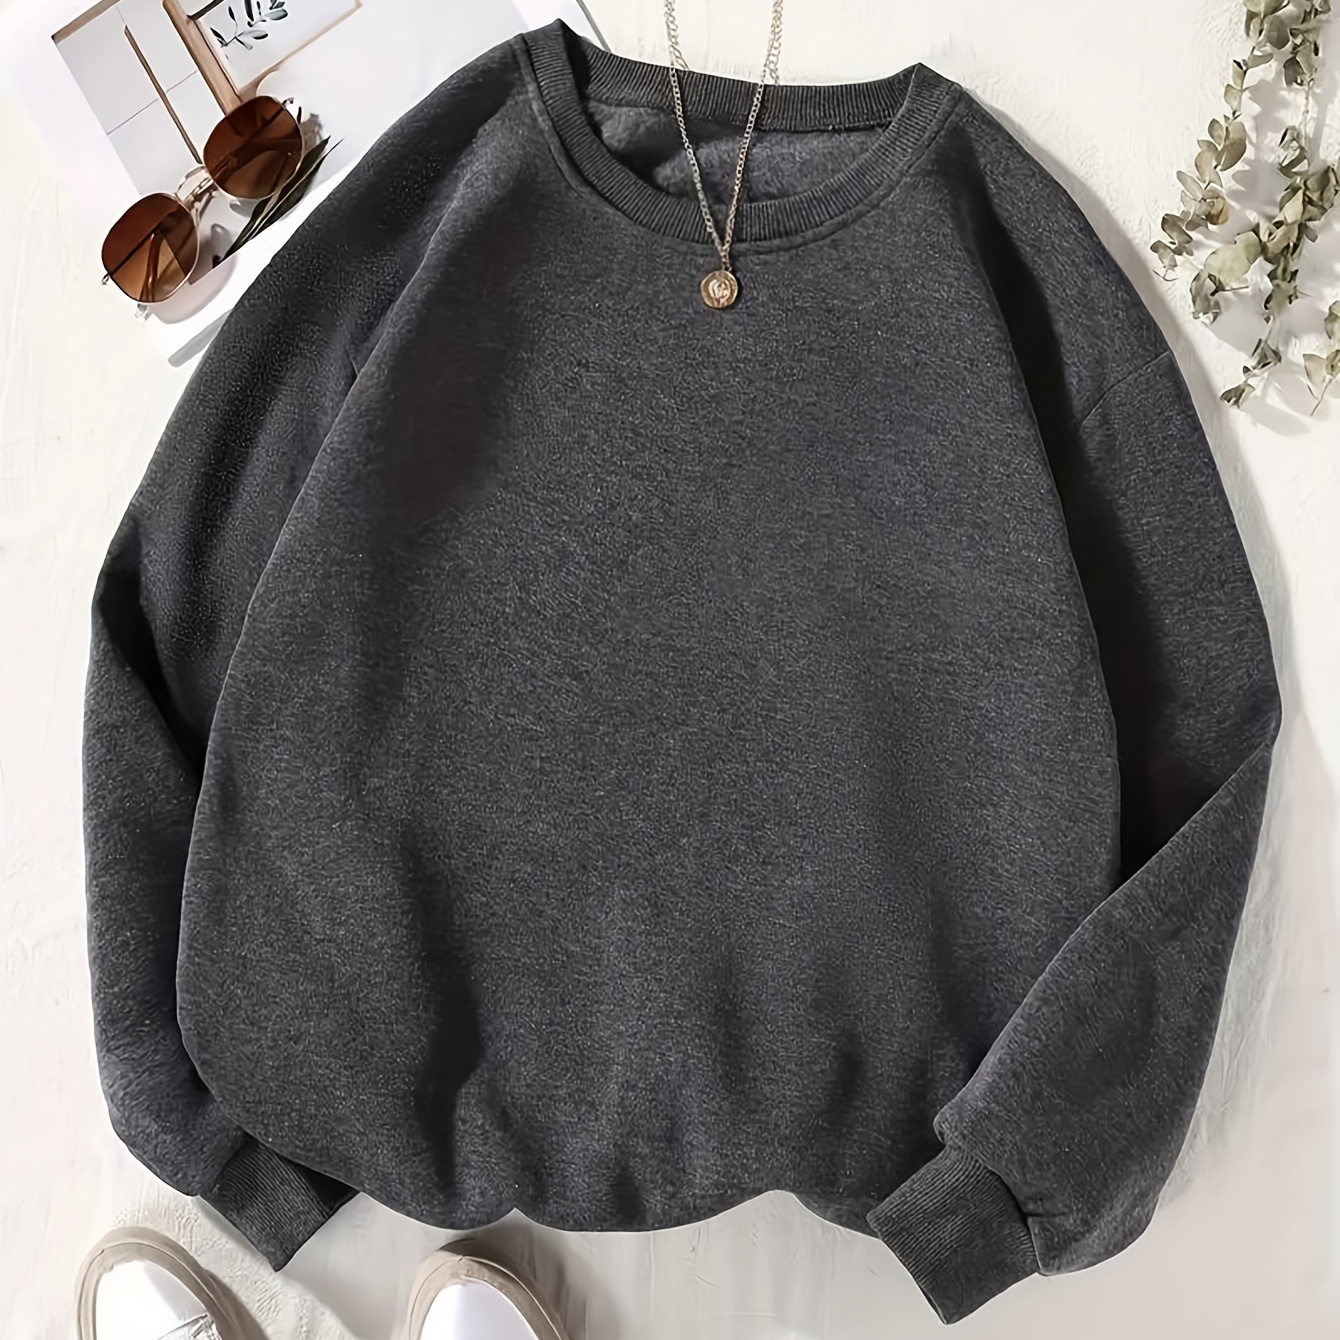 

Women's Solid Color Loose Fit Crew Neck Sweatshirt, Autumn/winter, Plush Lined, Thick Pullover, Long Sleeve Casual Sportswear Top